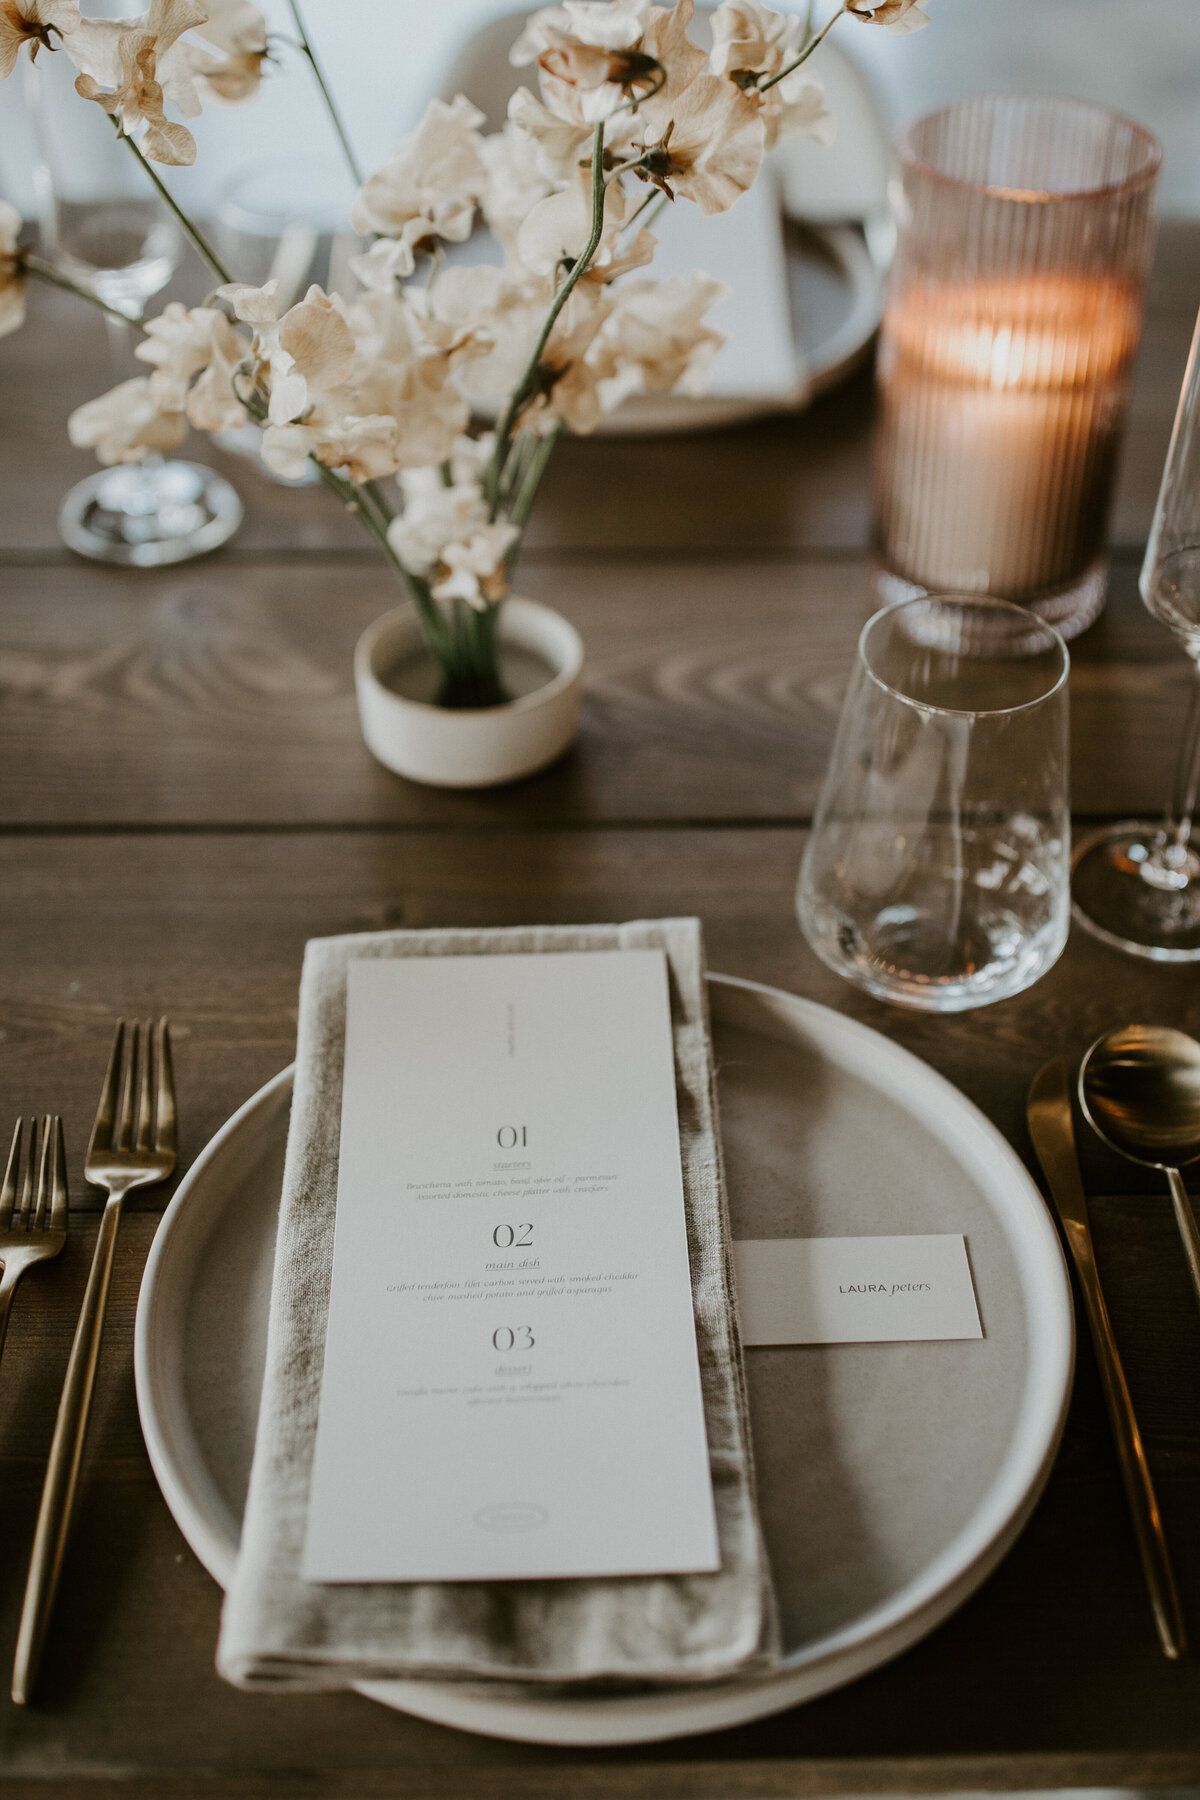 White dinner menu with black font atop a white linen napkin and white plate set on wooden table with white flowers.